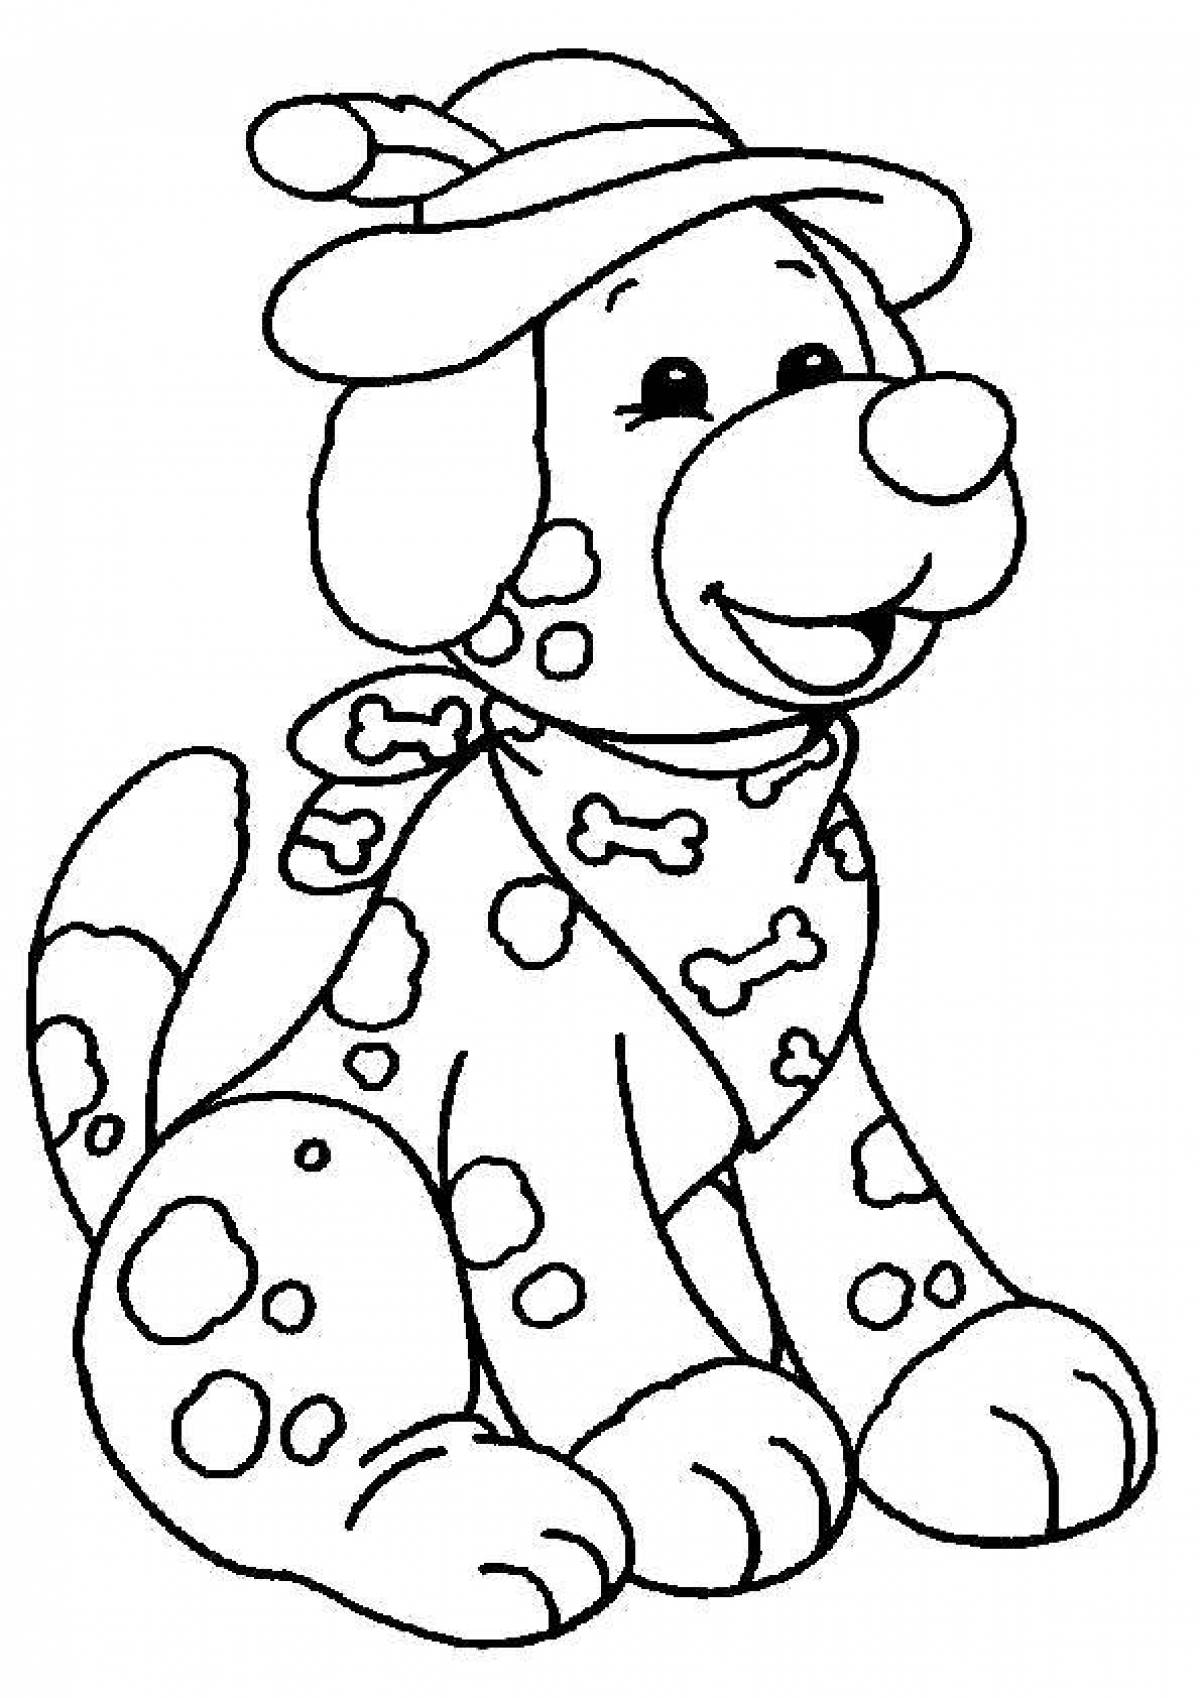 Playful coloring dog with clothes